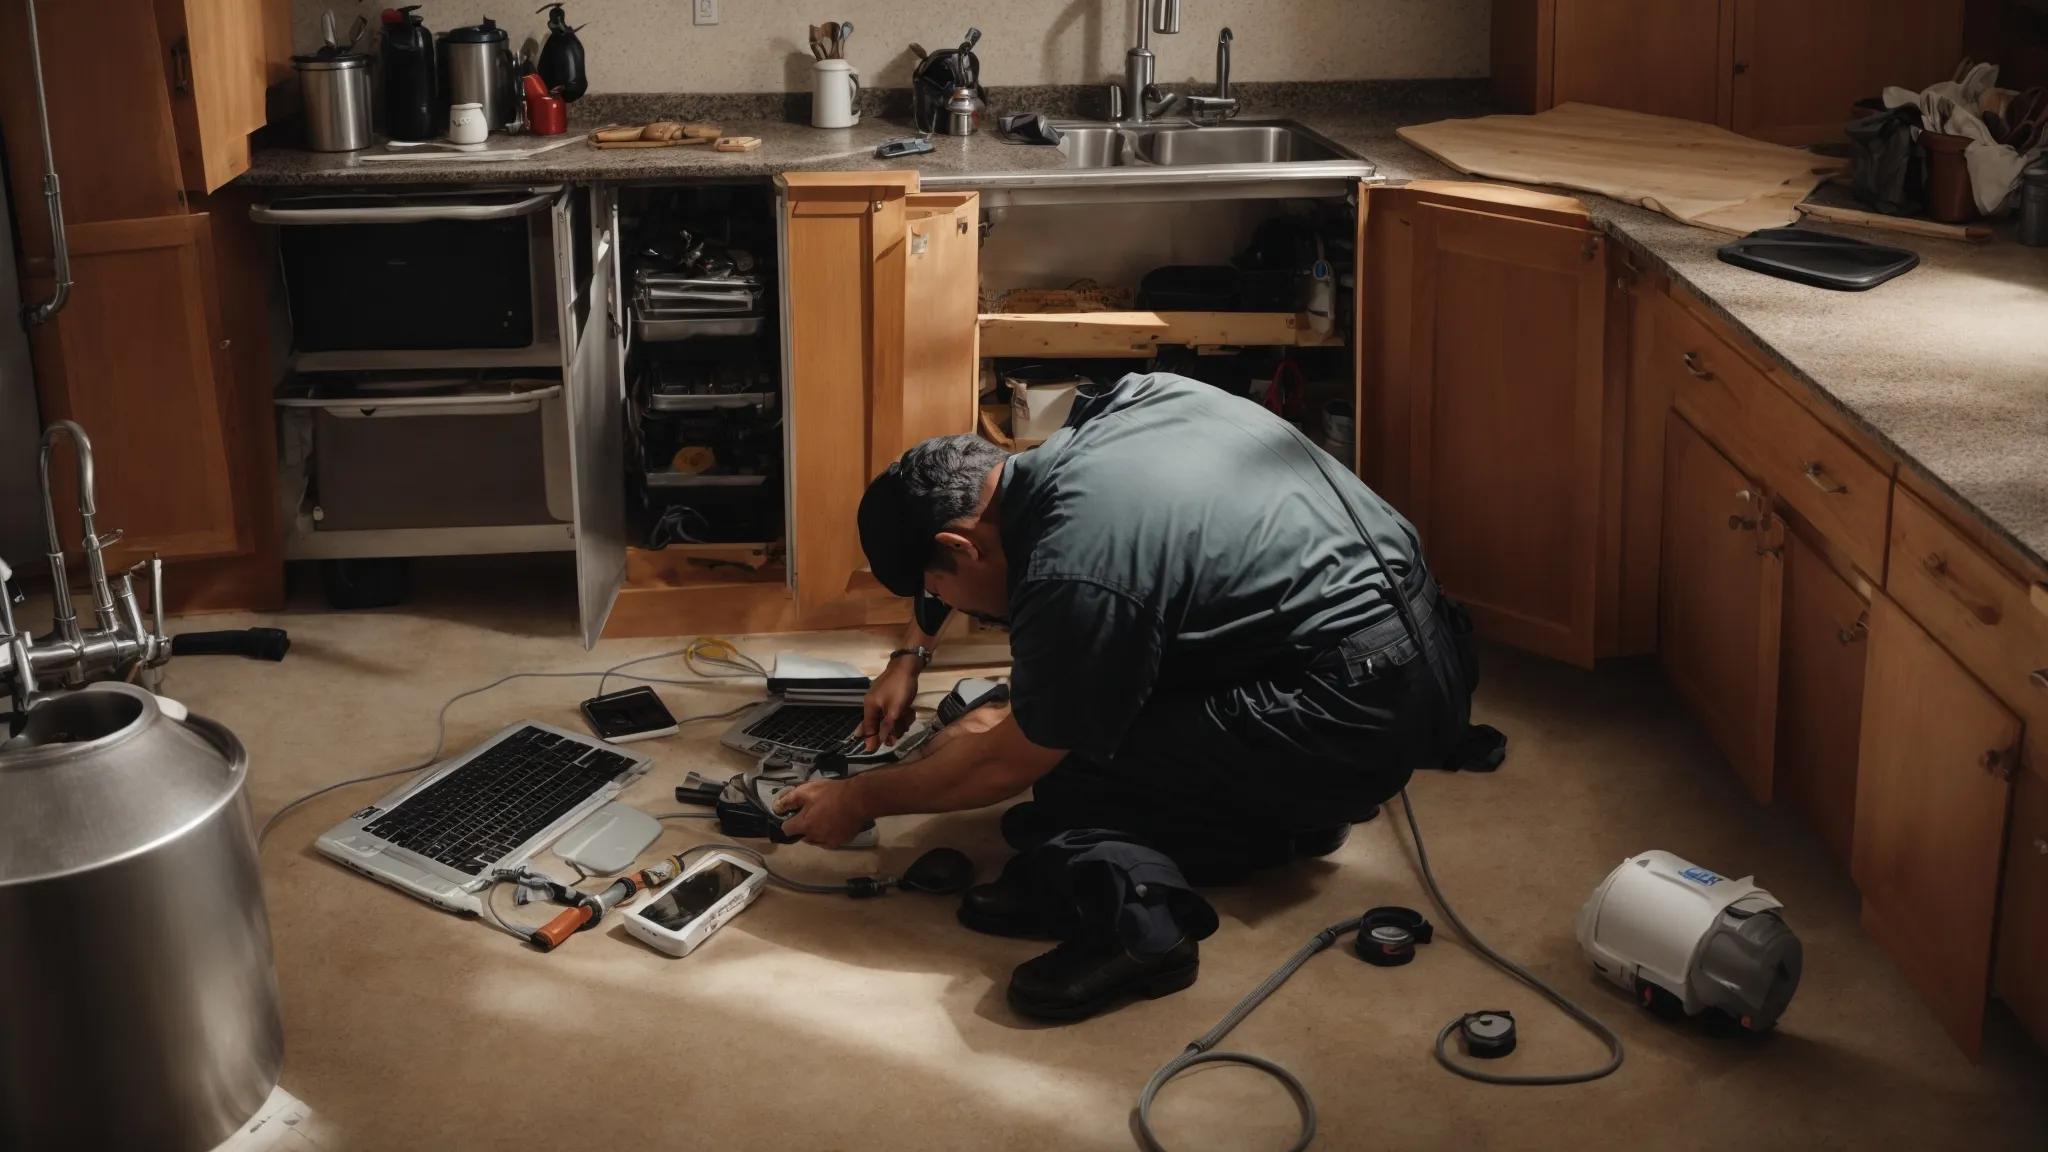 a plumber adjusting pipes beneath a kitchen sink with a laptop displaying graphs and data on the floor next to him.